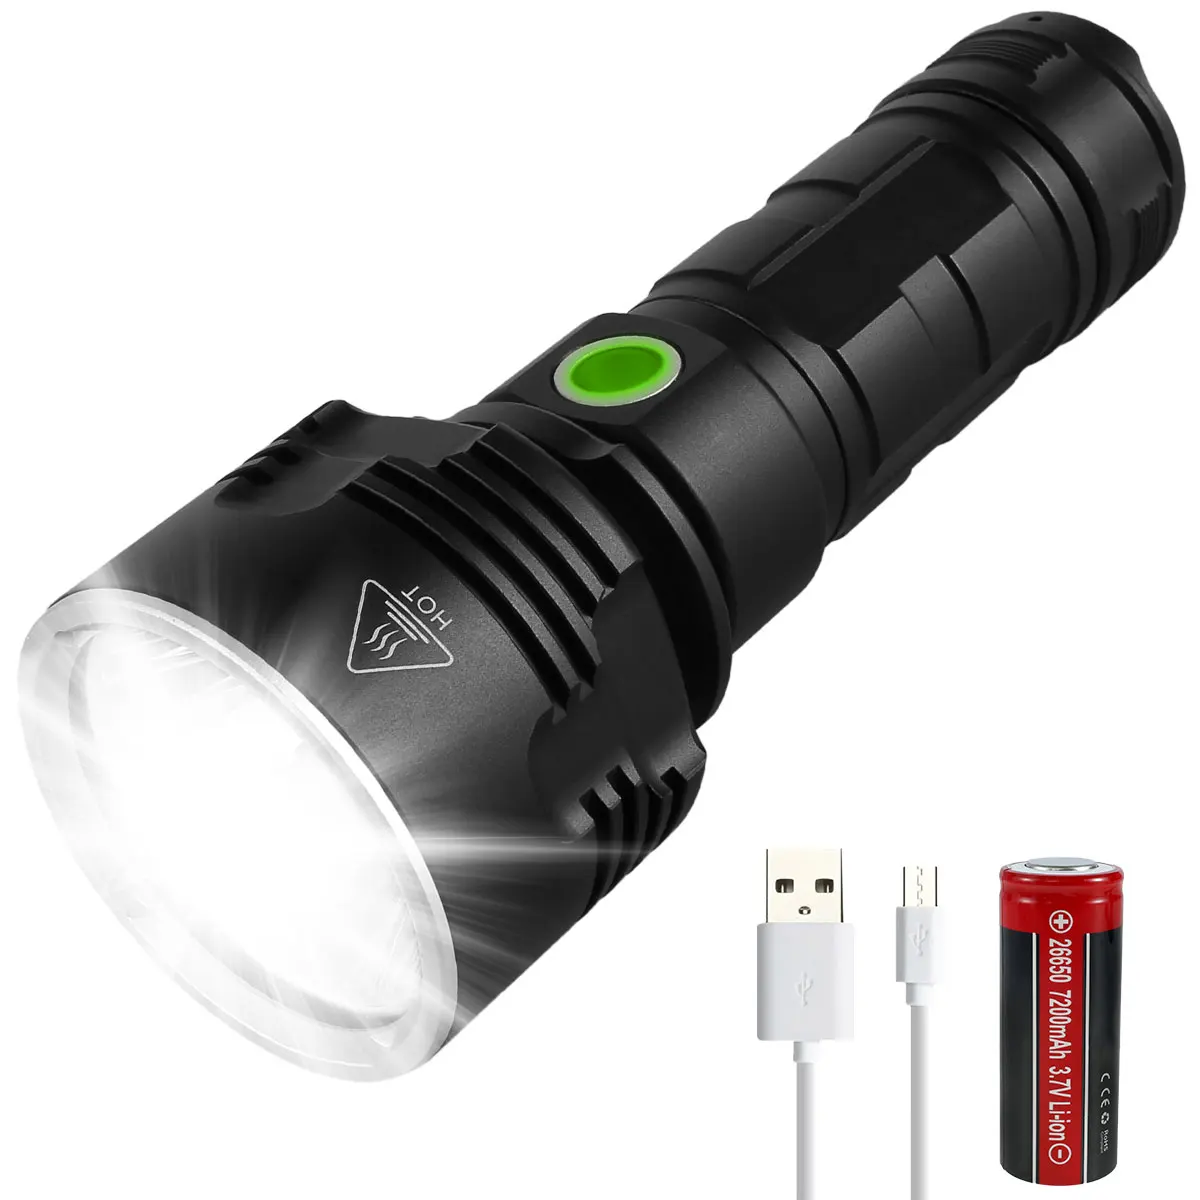 

USB Rechargeable LED Flashlight 4000LM Super Bright Searchlight W/ 5000mAh Battery Waterproof Torch Light For Camping Fishing